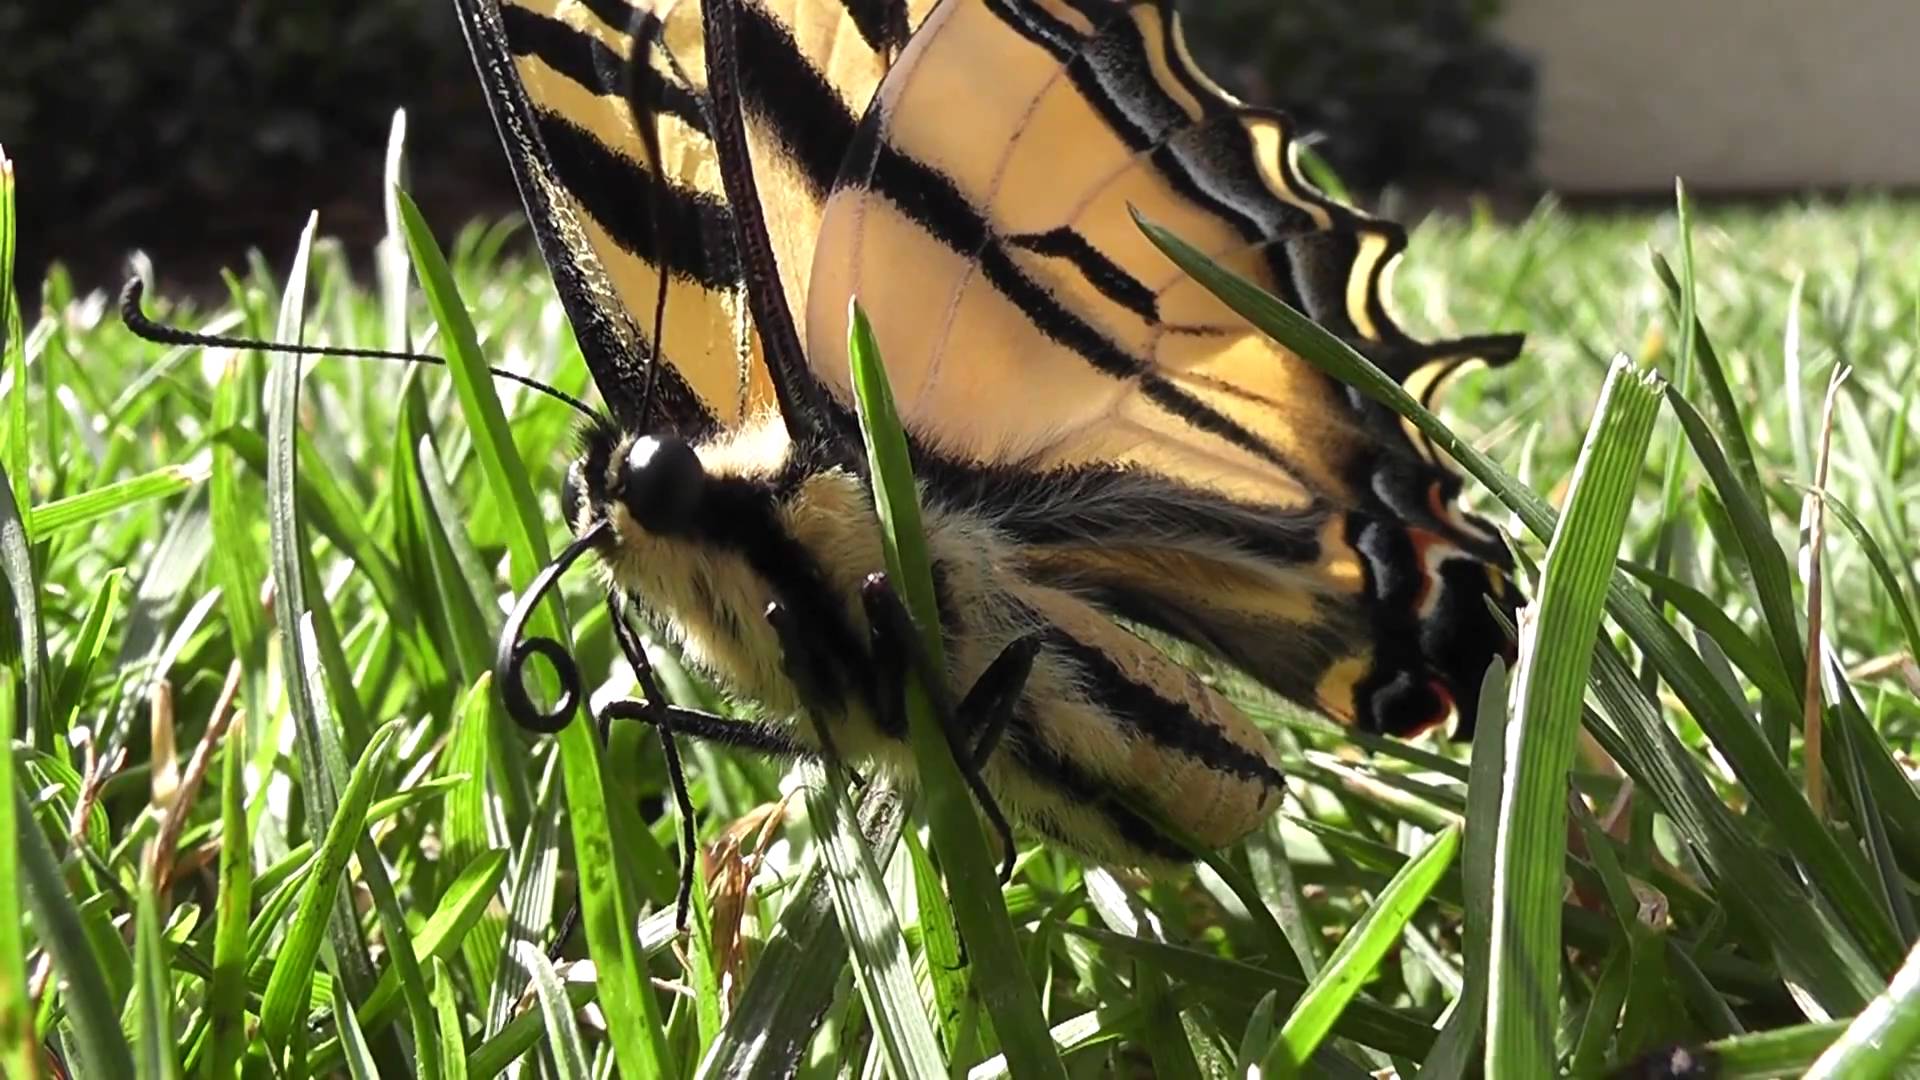 Big butterfly up close (HD) - YouTube